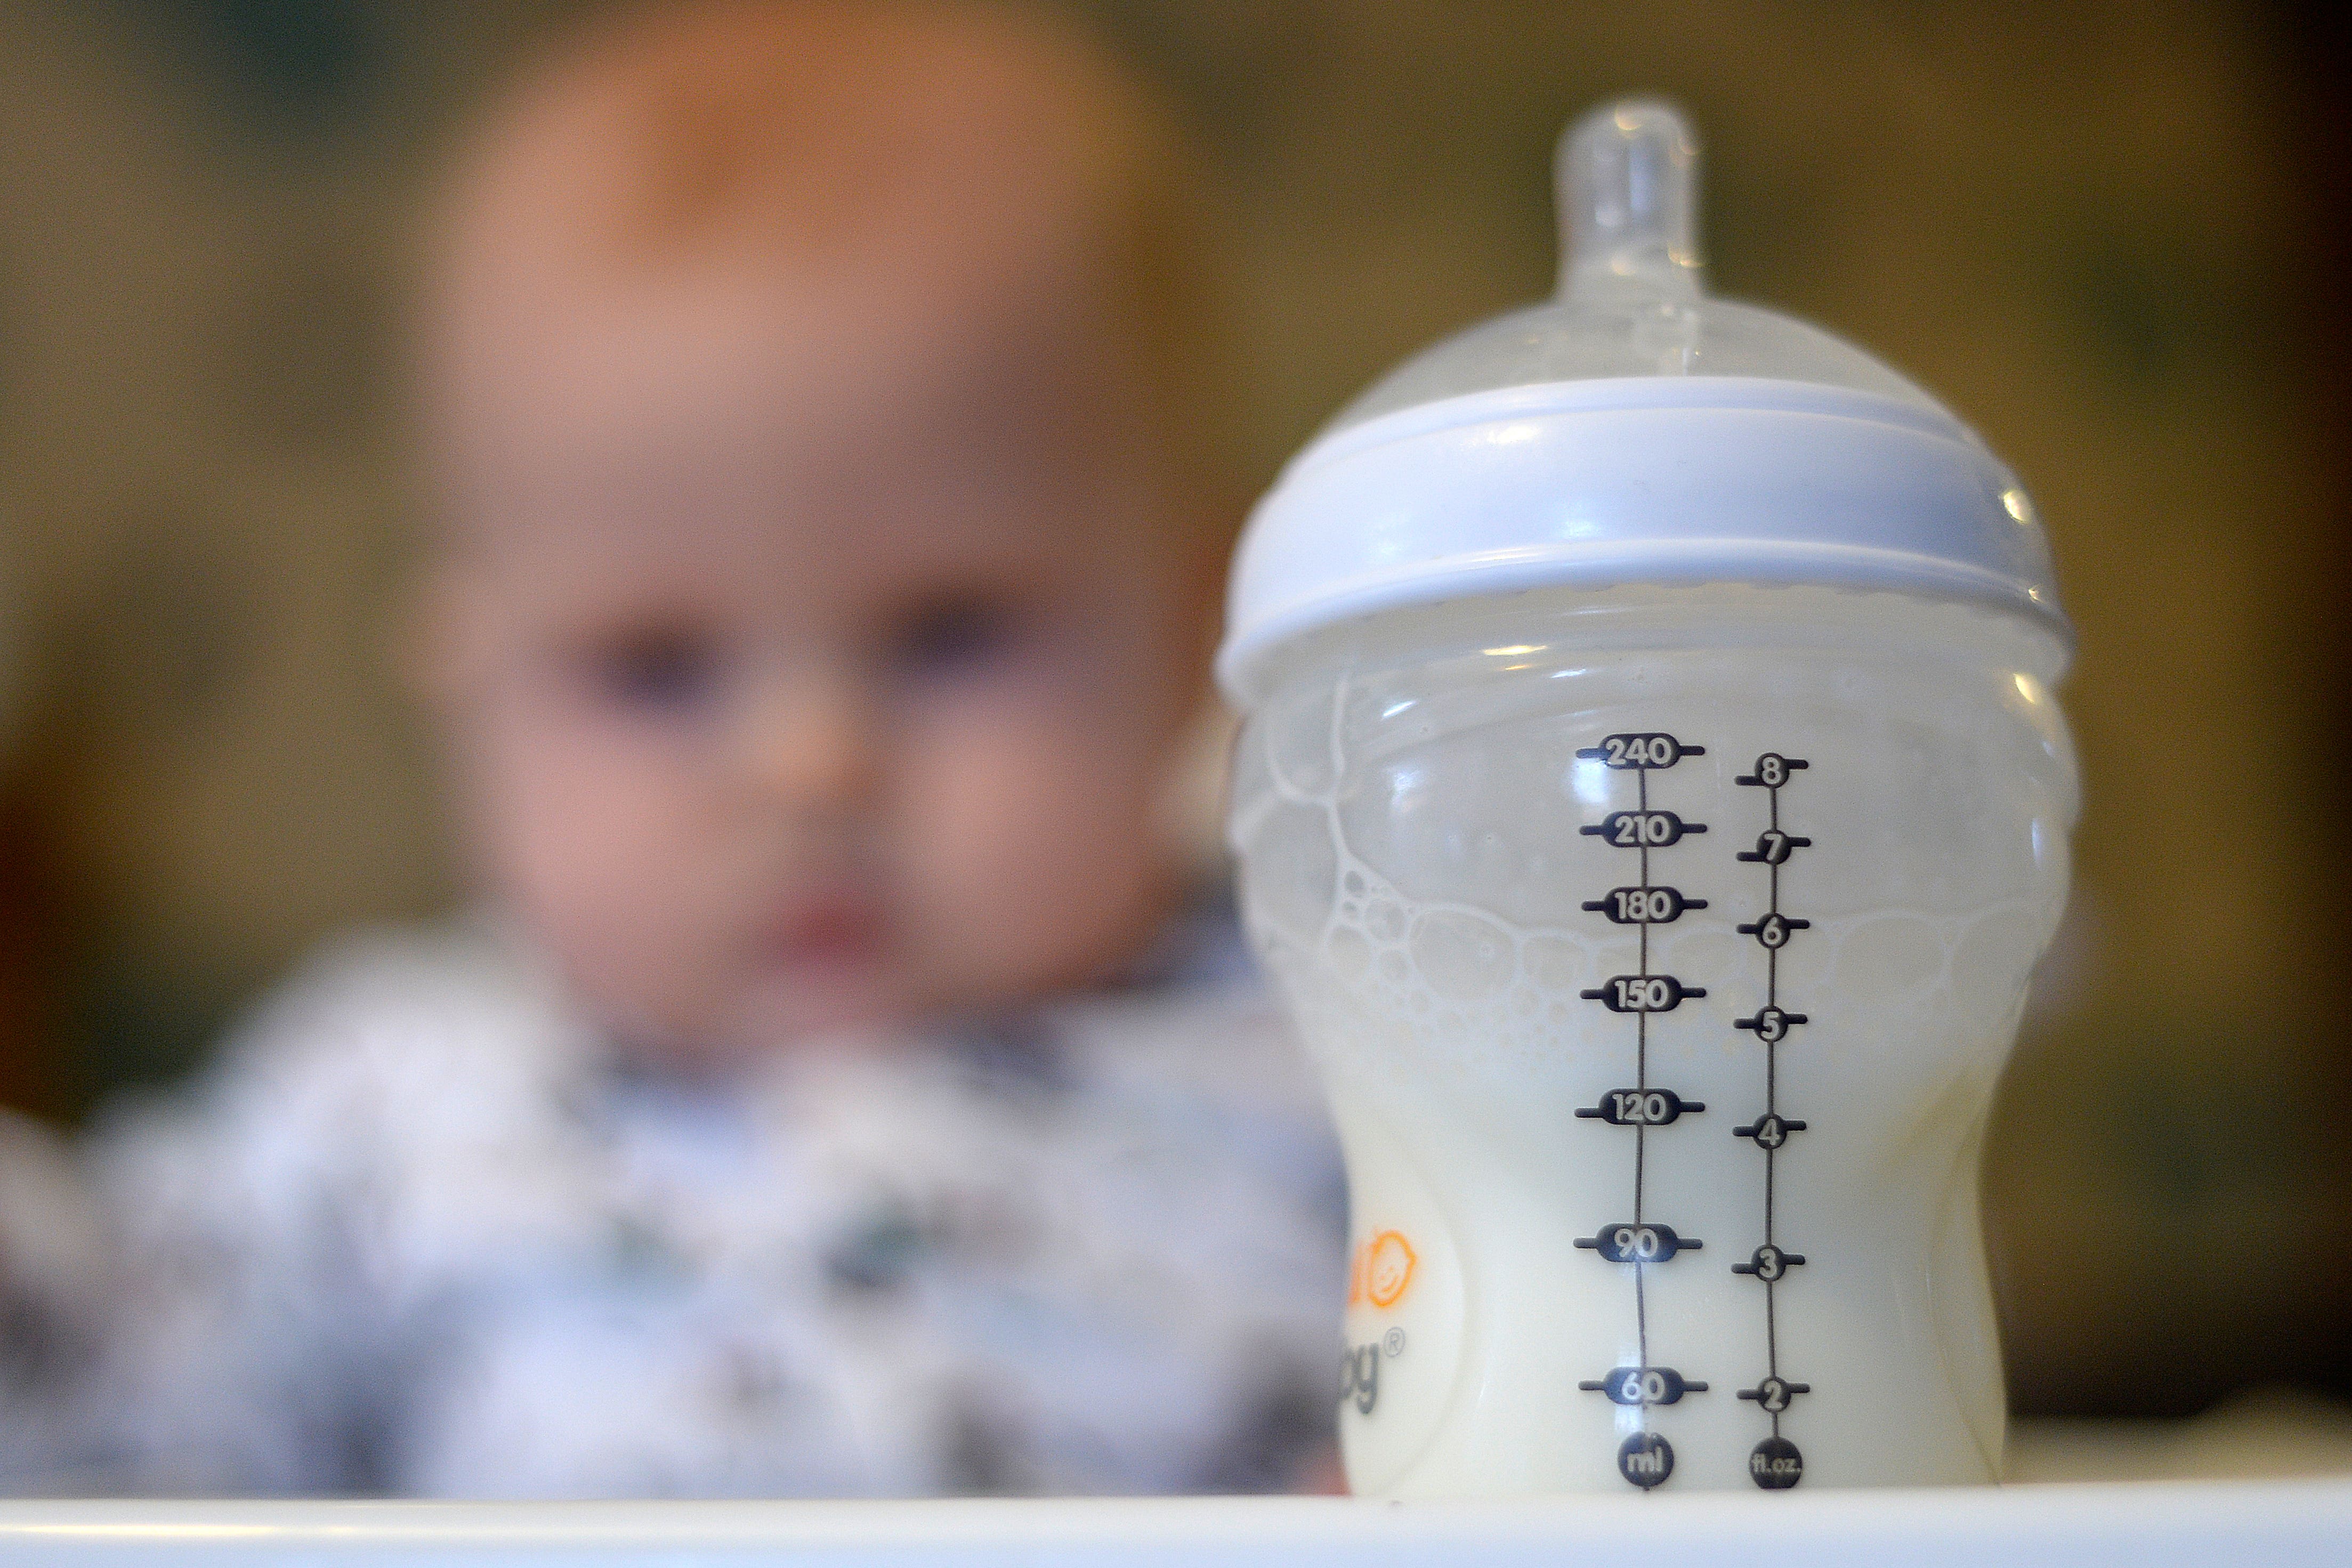 A baby in a high chair looks towards a bottle of milk in the foreground